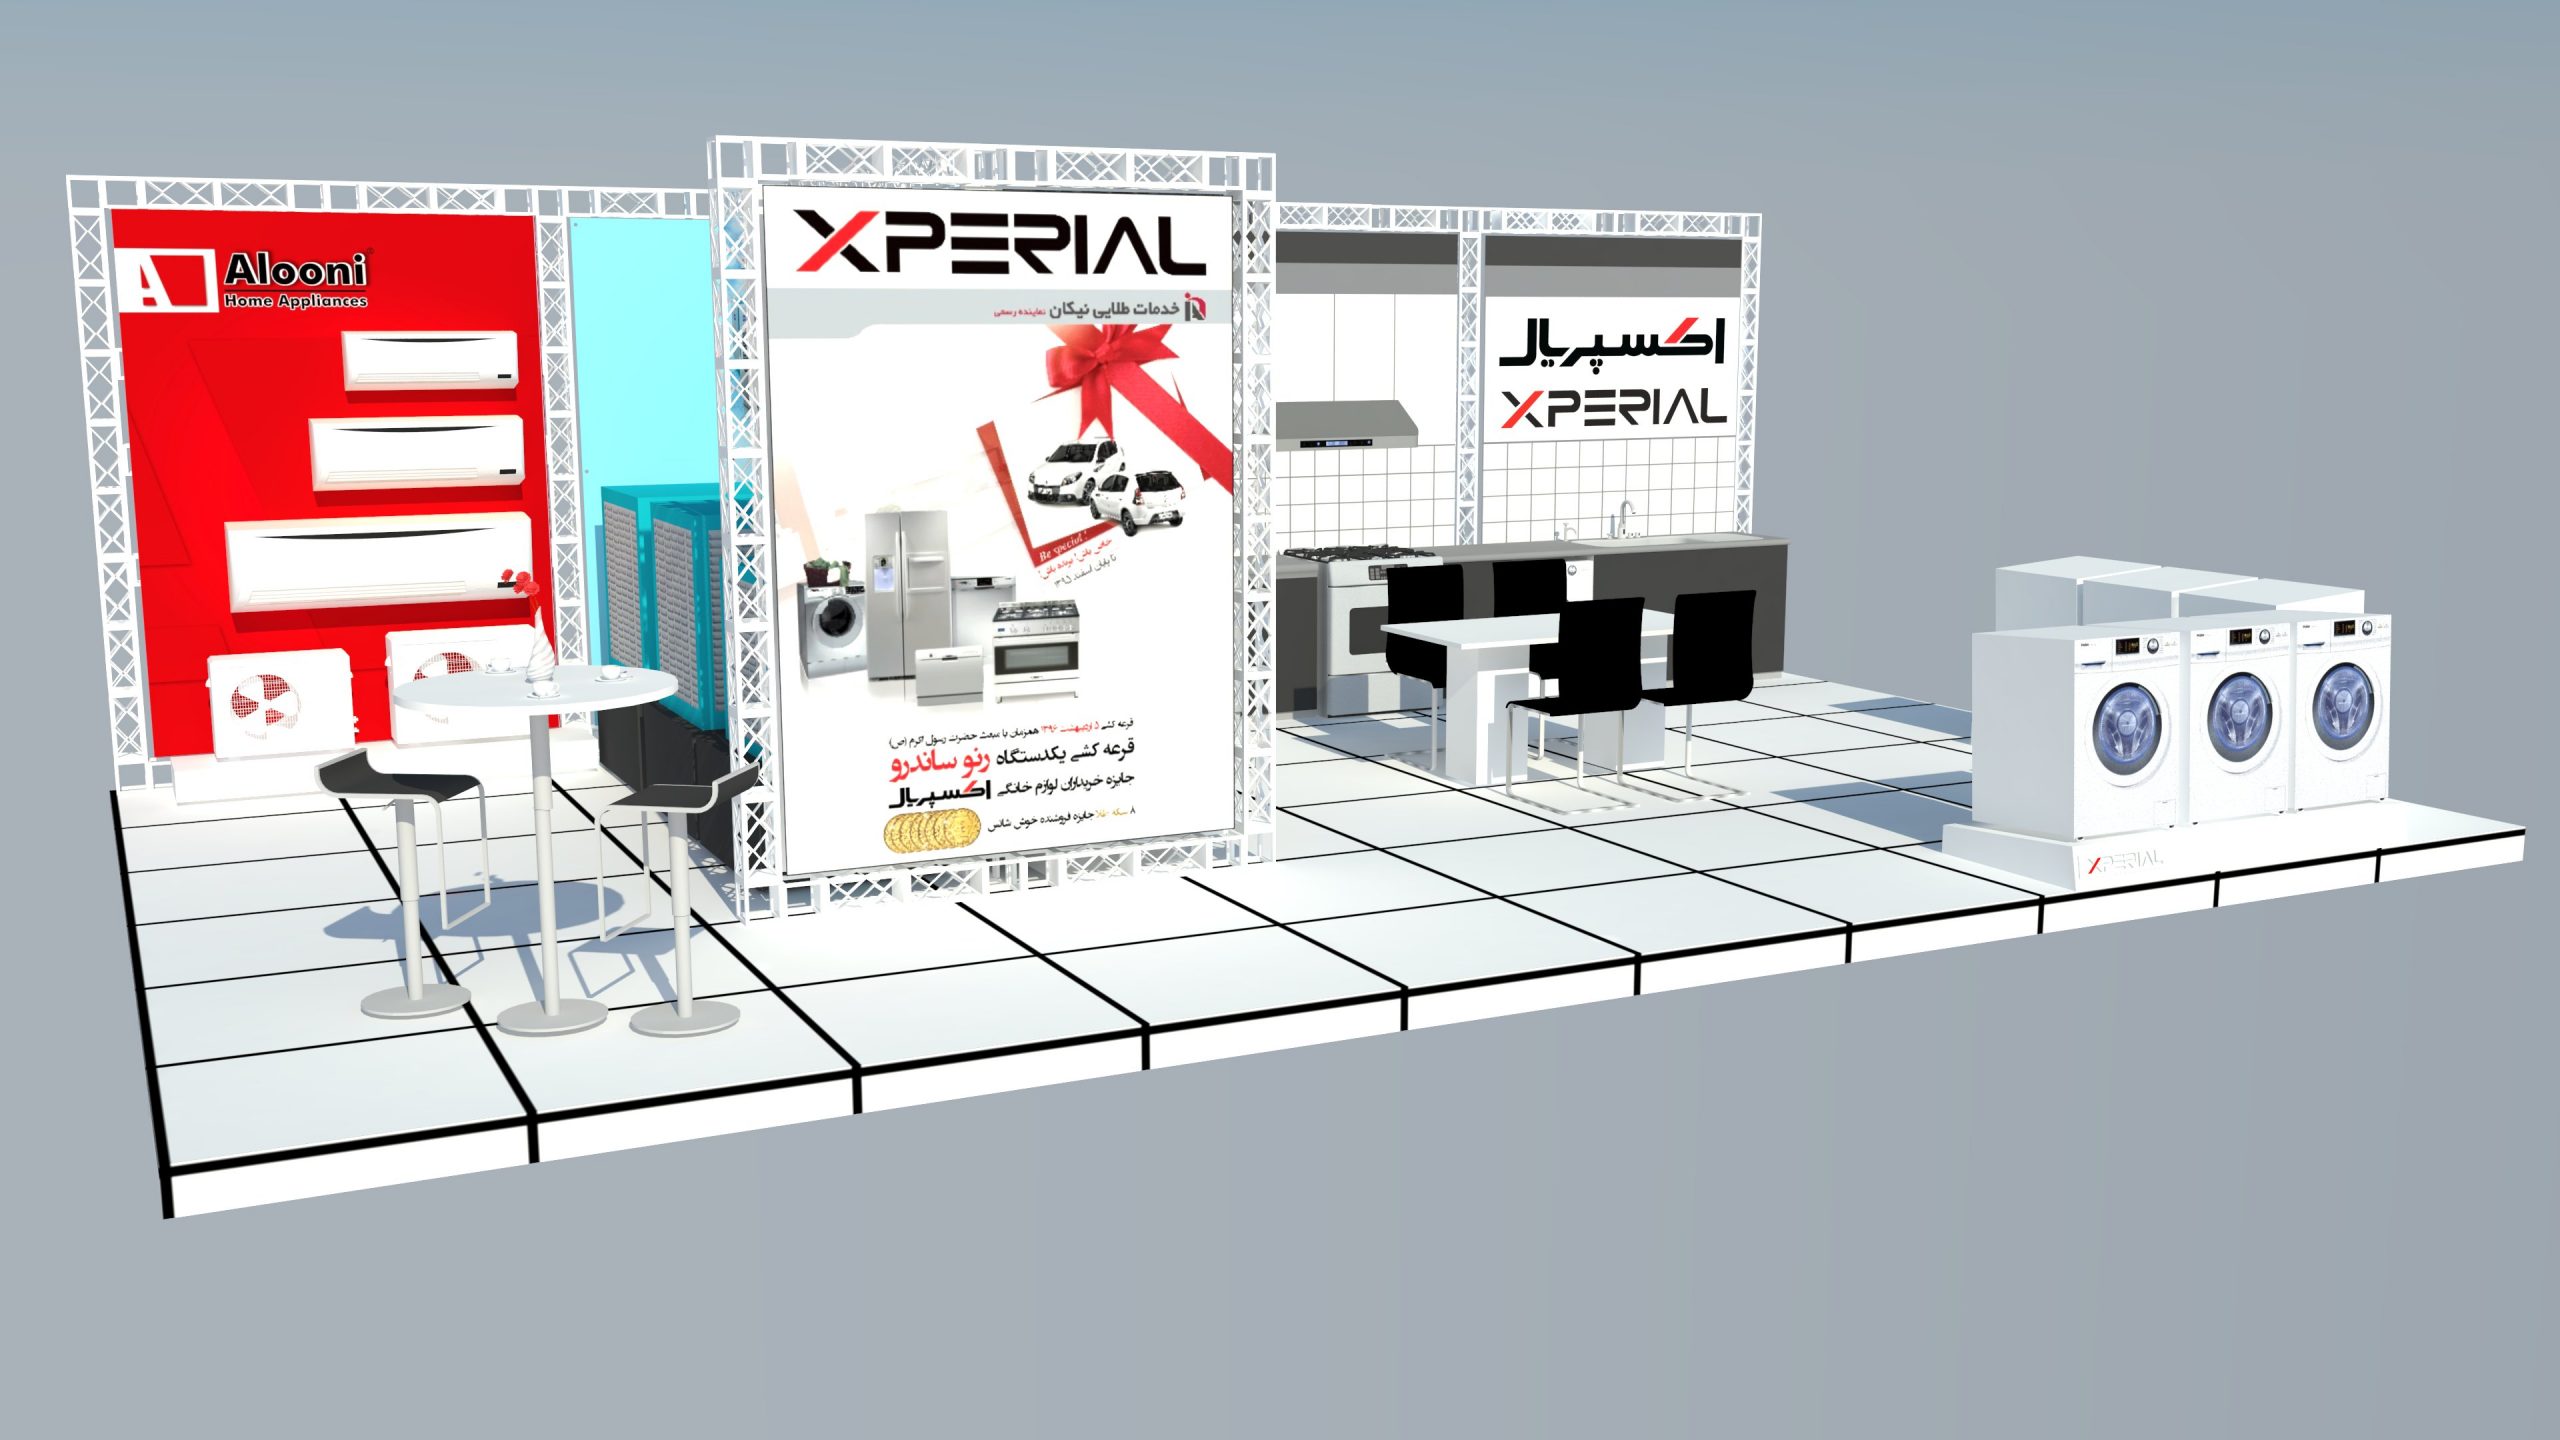 Initial design of the Experial exhibition booth with MDF material